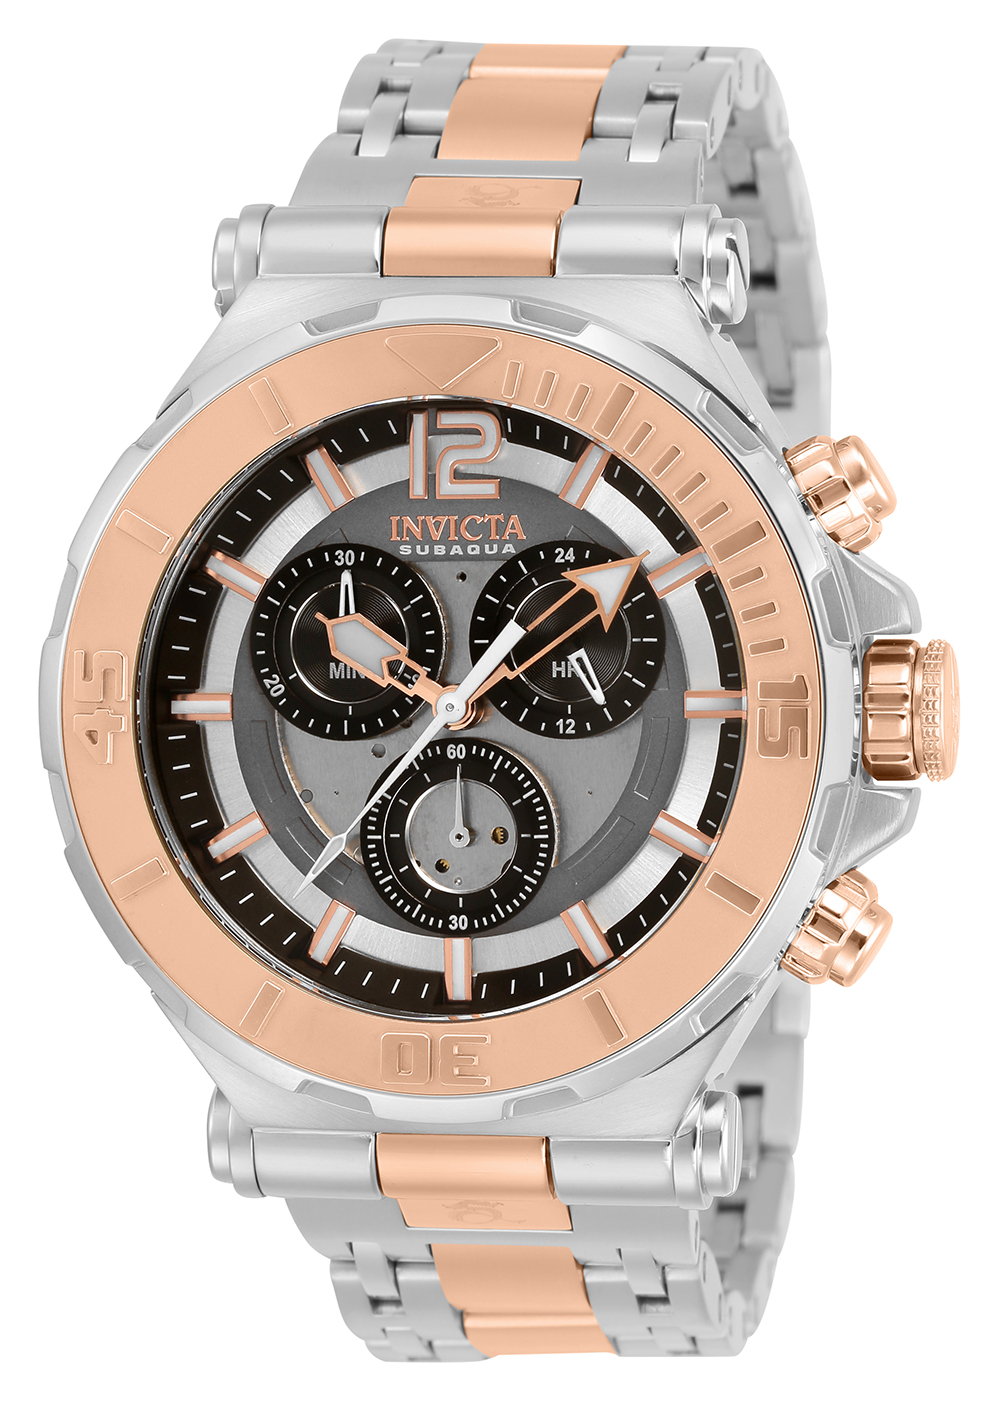 Invicta Subaqua Quartz Mens Watch - 46mm Stainless Steel Case, Stainless Steel Band, Steel, Rose Gold (31347)